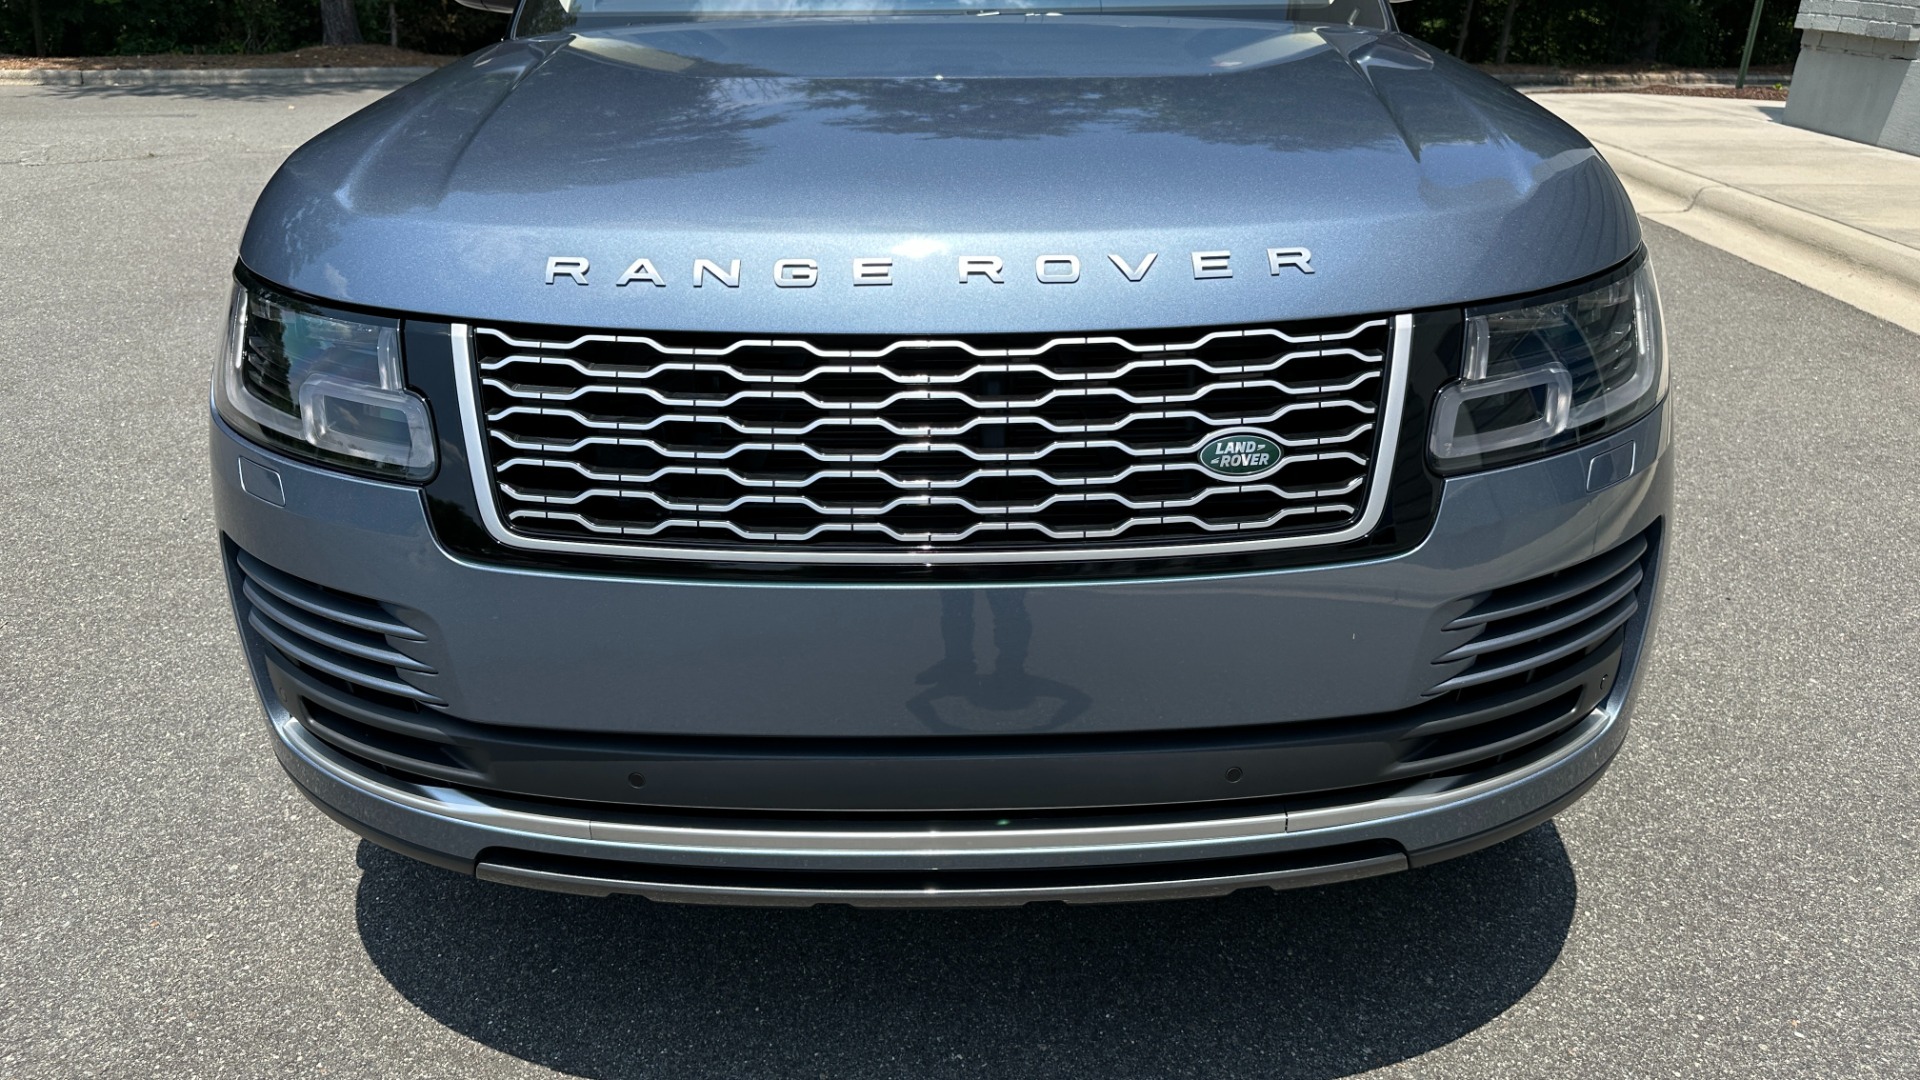 Used 2019 Land Rover Range Rover SUPERCHARGED / 22IN WHEELS / MERIDIAN SOUND / ATLAS ACCENTS for sale $69,100 at Formula Imports in Charlotte NC 28227 9